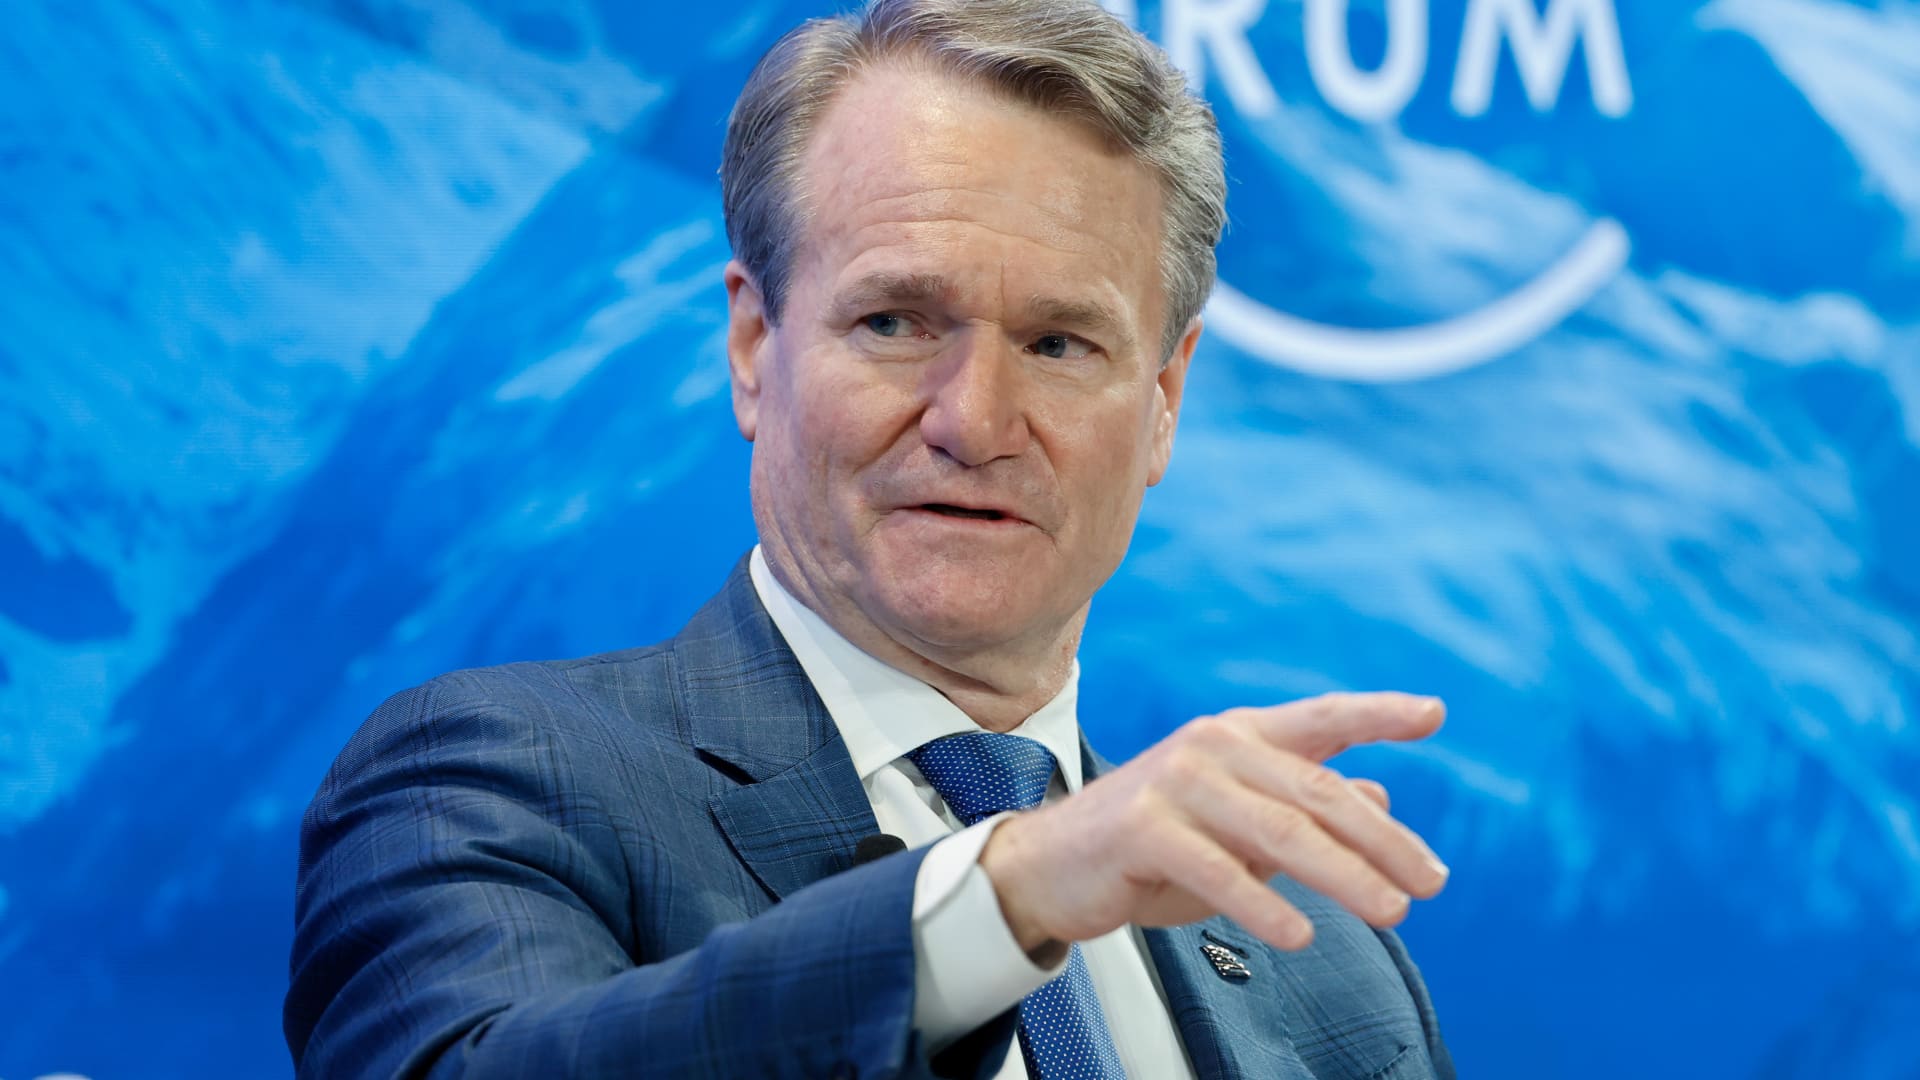 Bank of America CEO says capitalism needs cleaning up with new global ESG rules